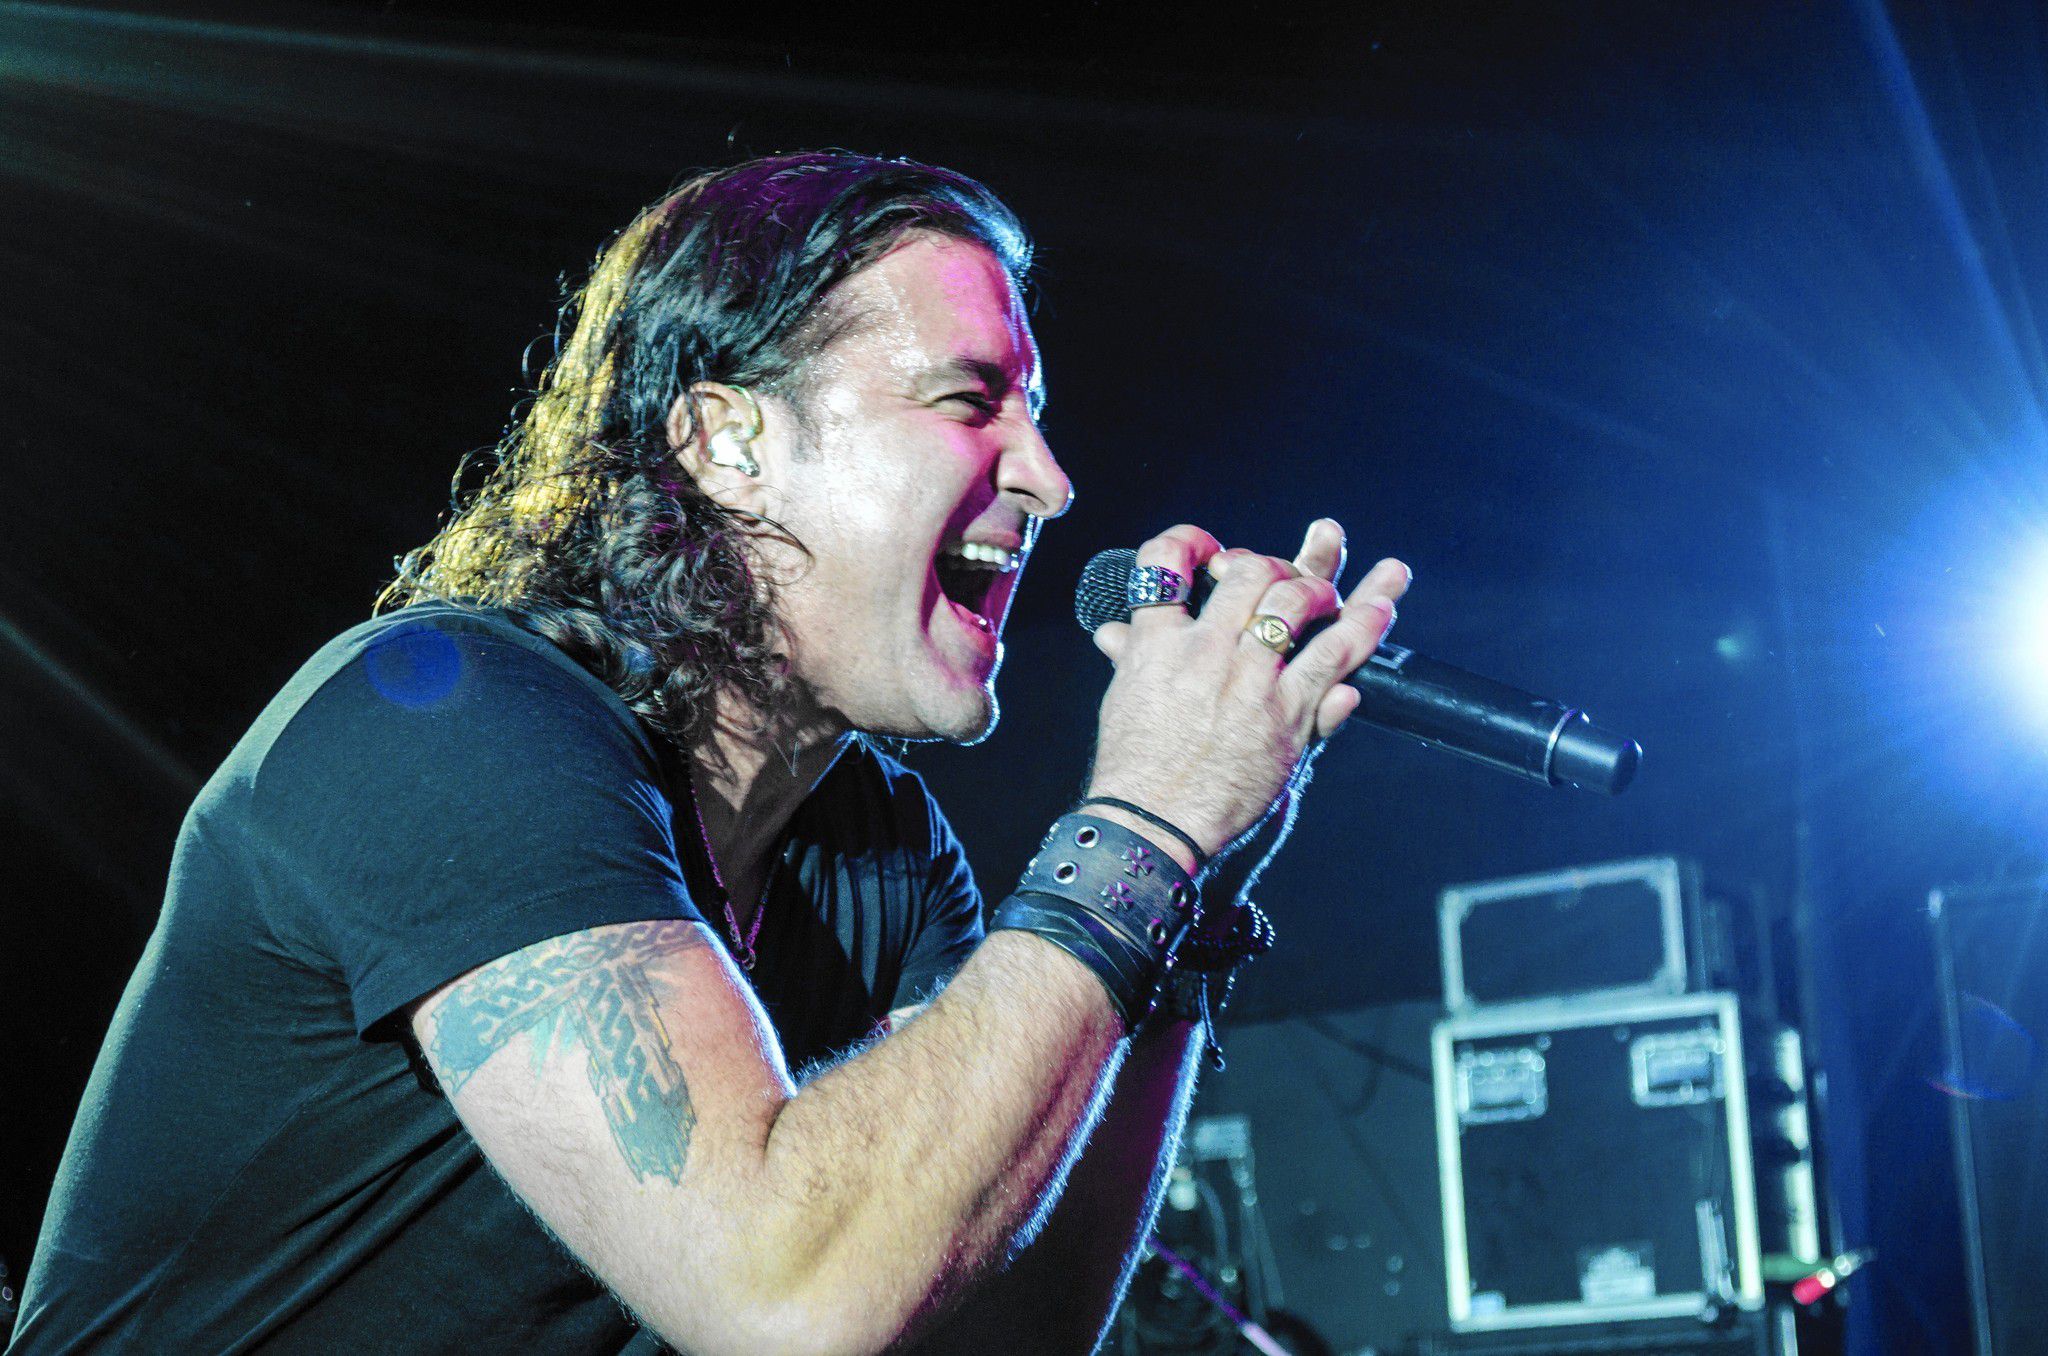 Scott Stapp Interview: Creed Singer Ready For a Normal Rock Star